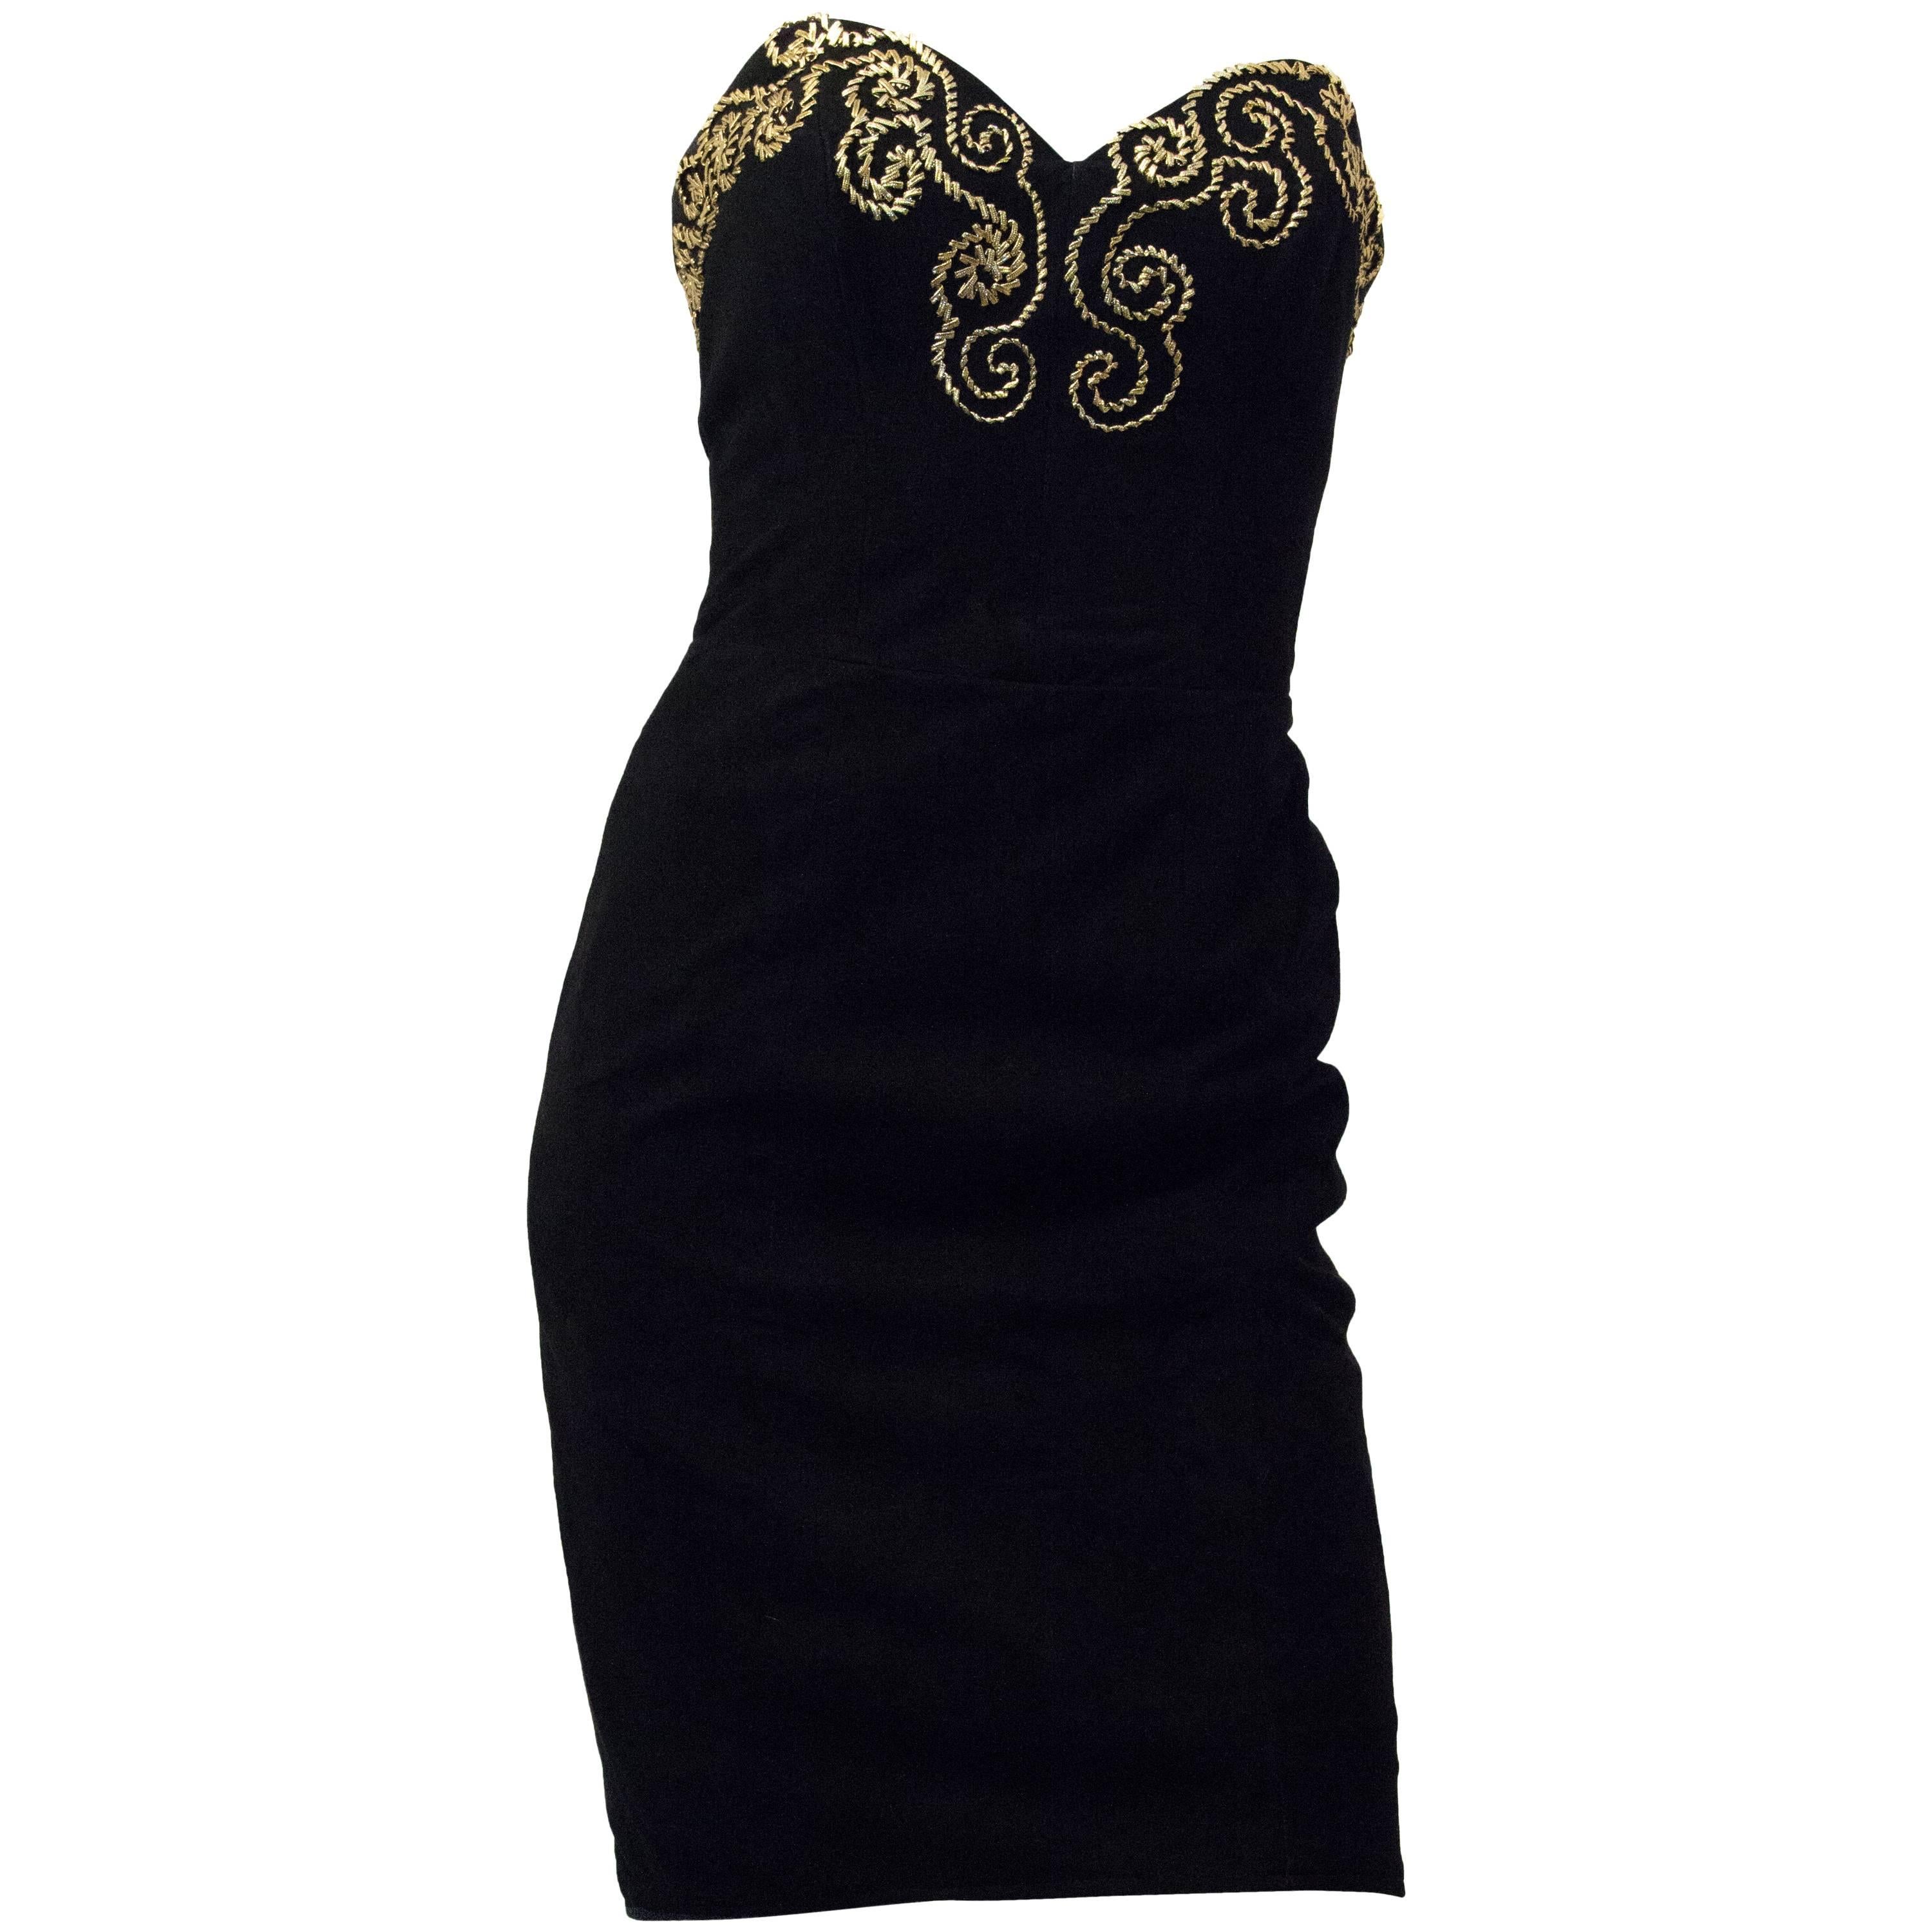 80s Black Suede Strapless Cocktail Dress with Gold Metal Embellishment   For Sale